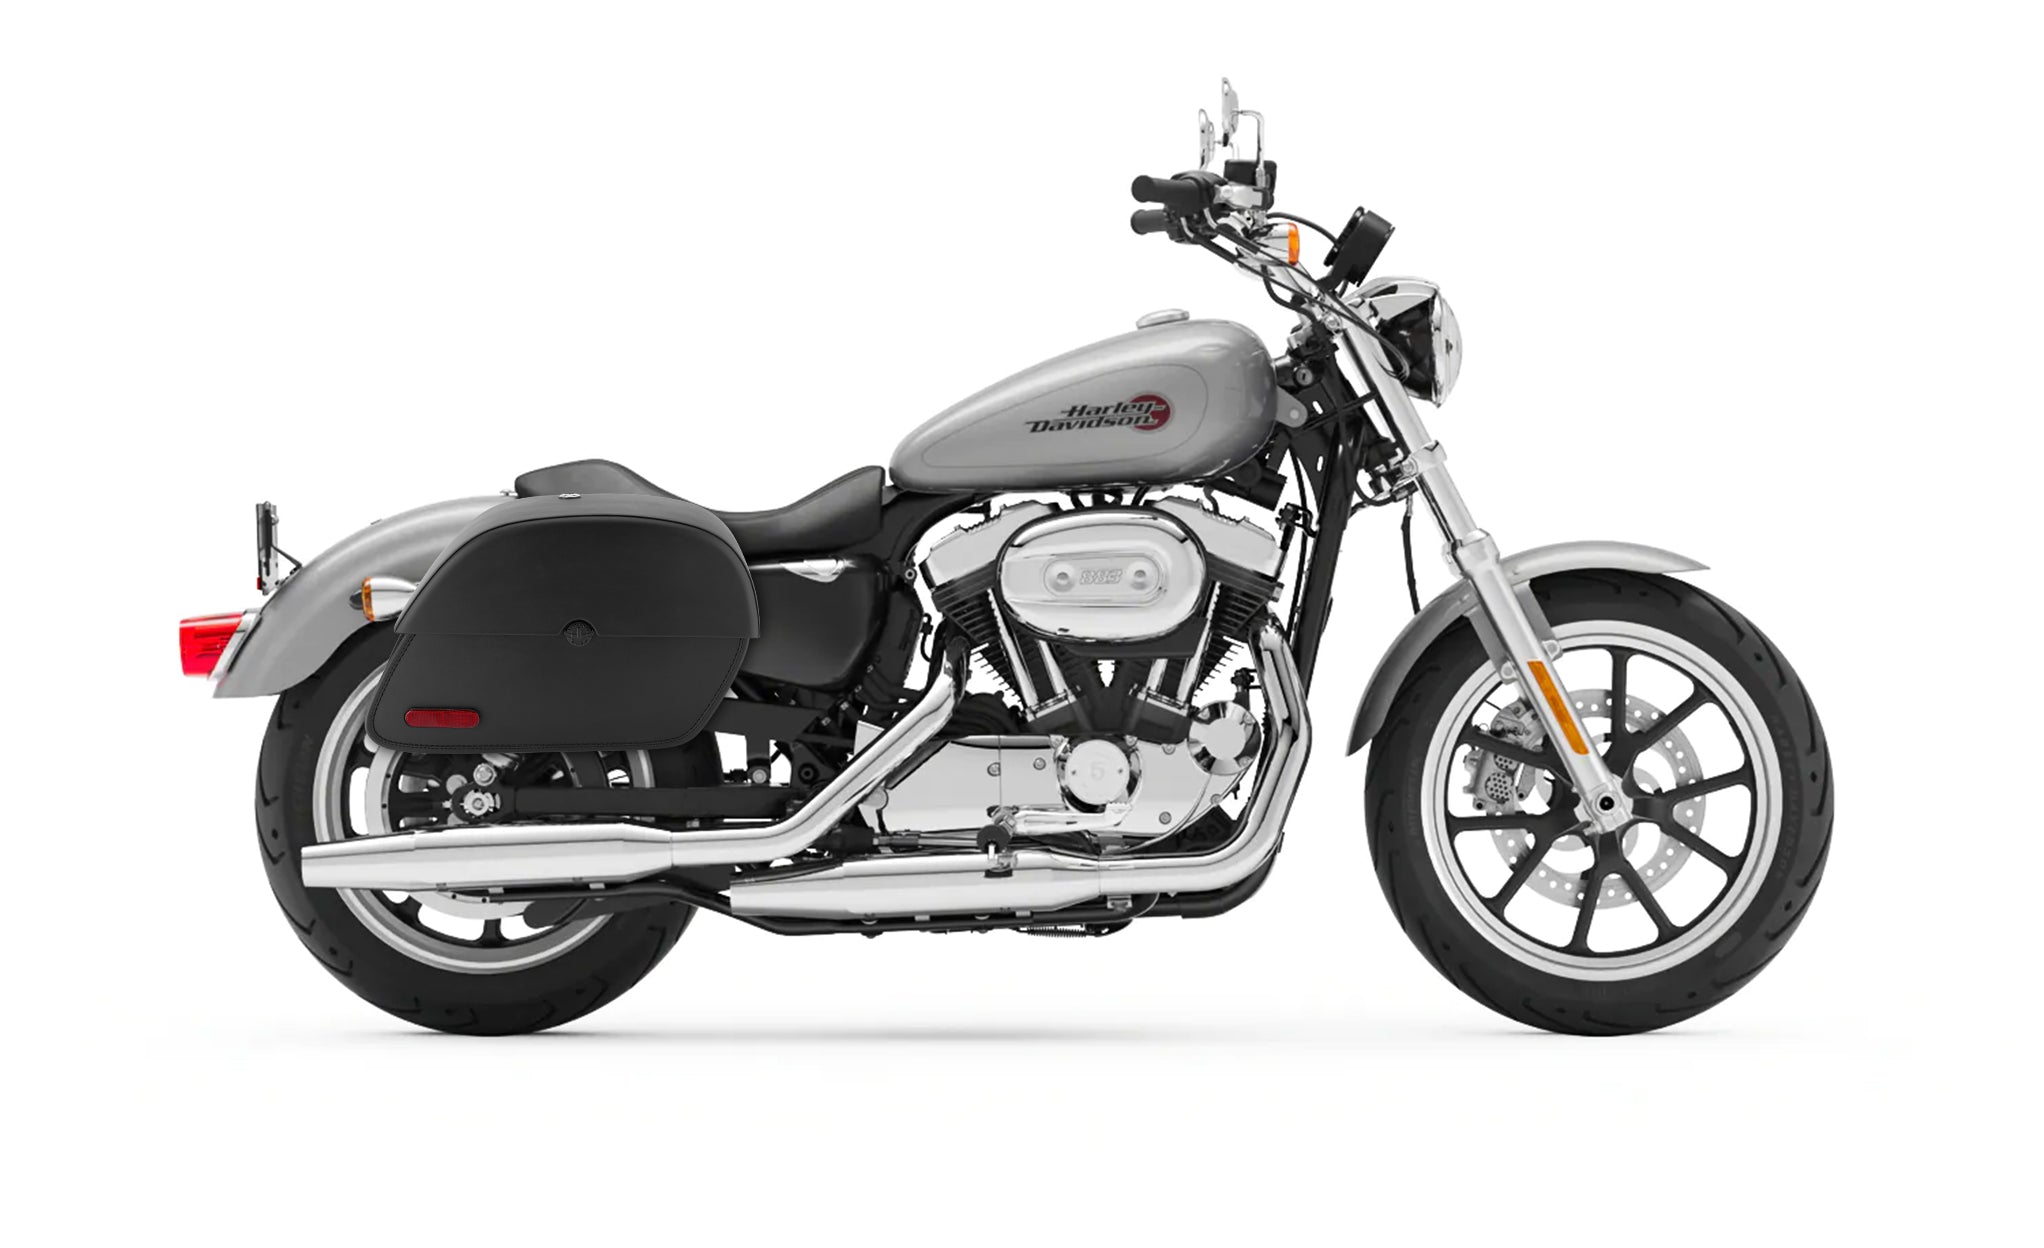 28L - Panzer Medium Quick Mount Leather Saddlebags For Harley Sportster Super Low XL883L @expand